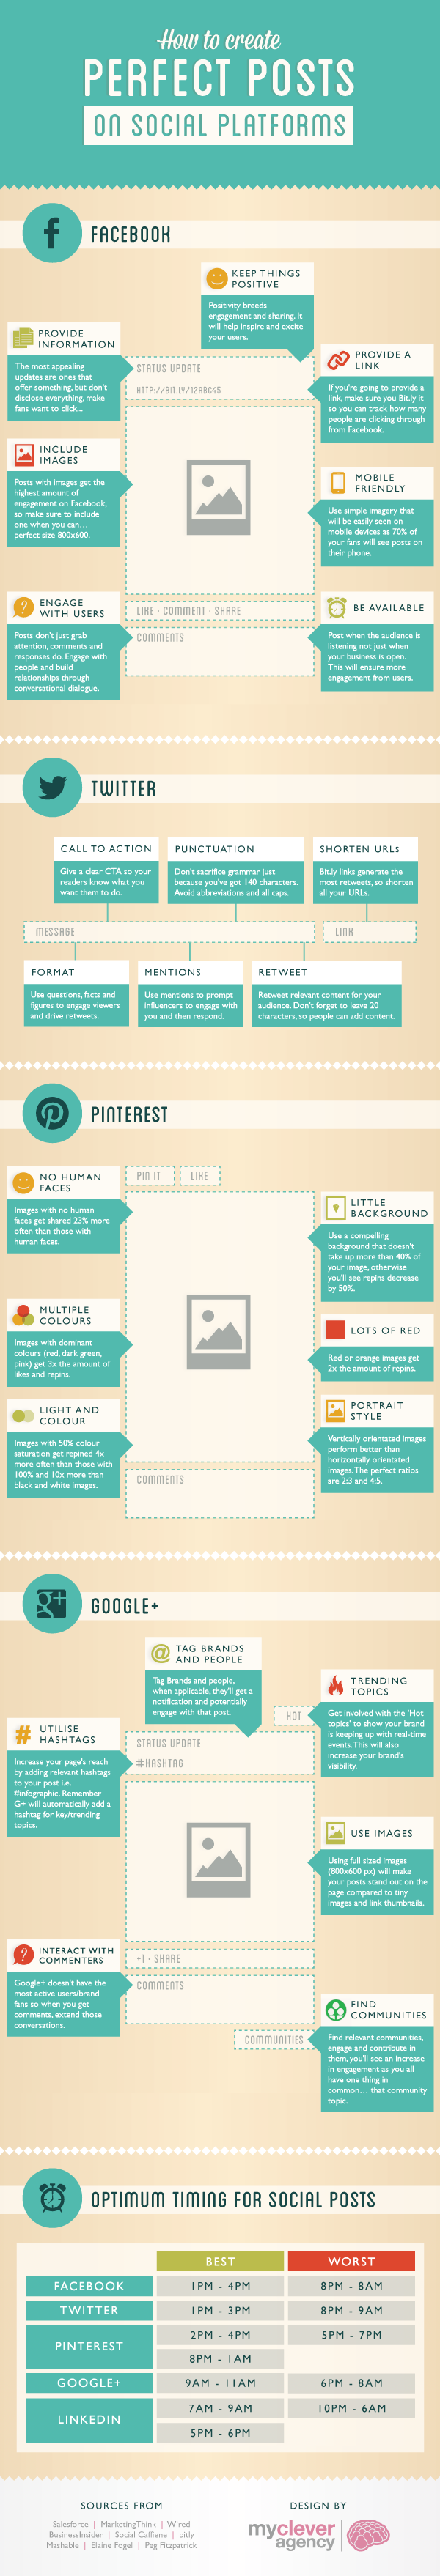 Guide to Social Media Posts on Facebook, Twitter, Pinterest, LinkedIn, and Google+ (Infographic)